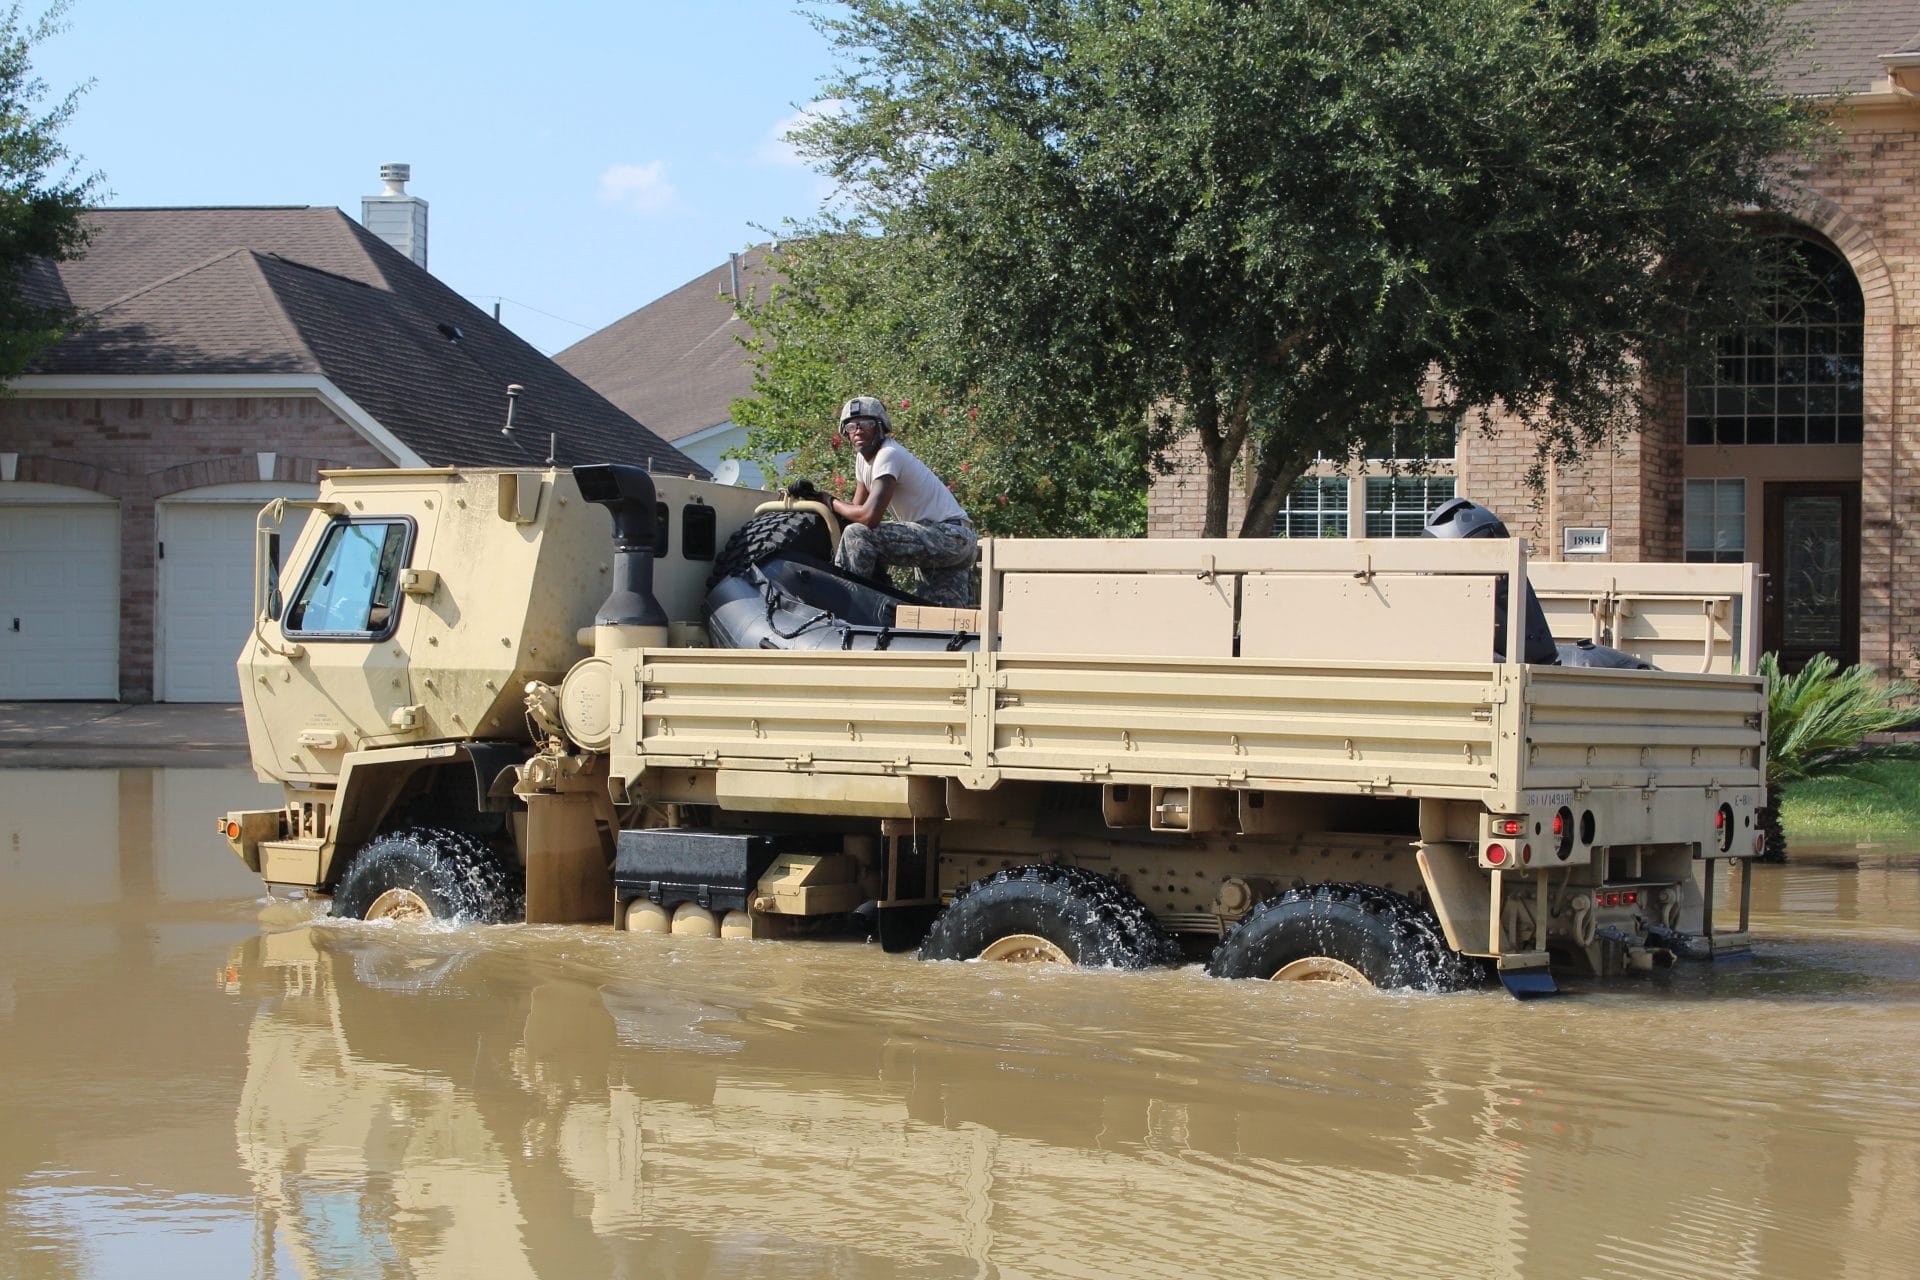 A US Army soldier atop a military vehicle in a street flooded by Hurricane Harvey